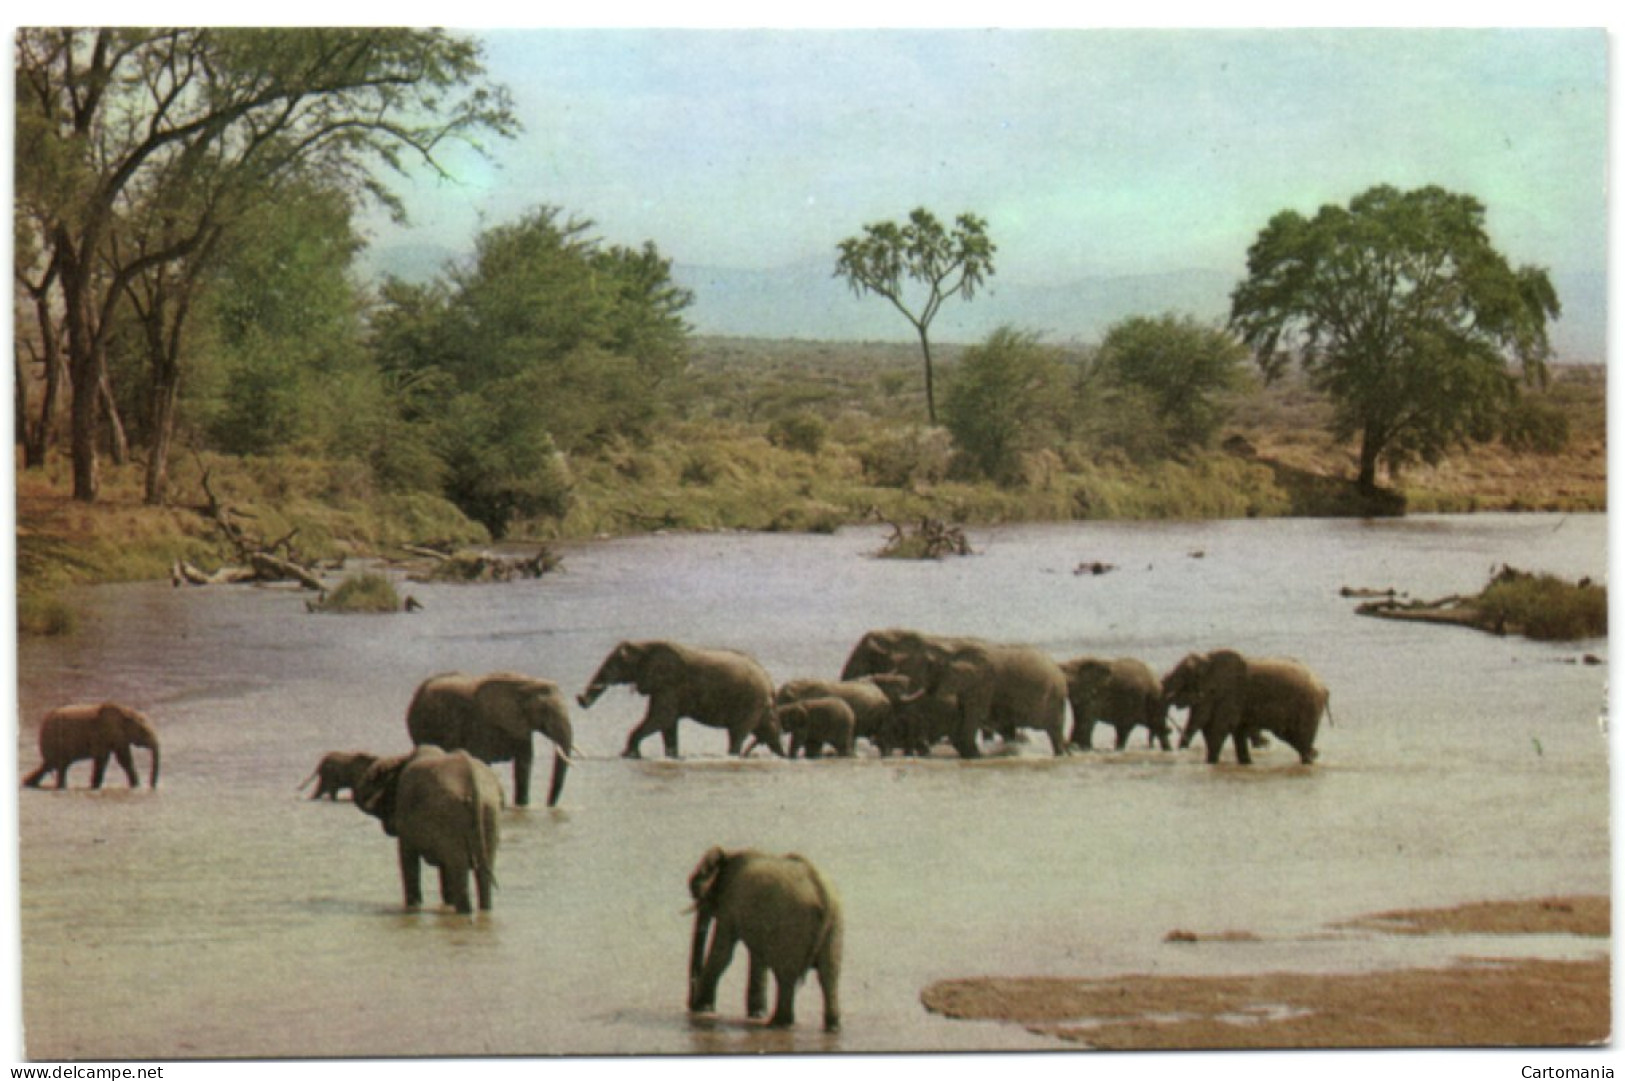 The East African Wild Life Society - River Crossing - Kenya